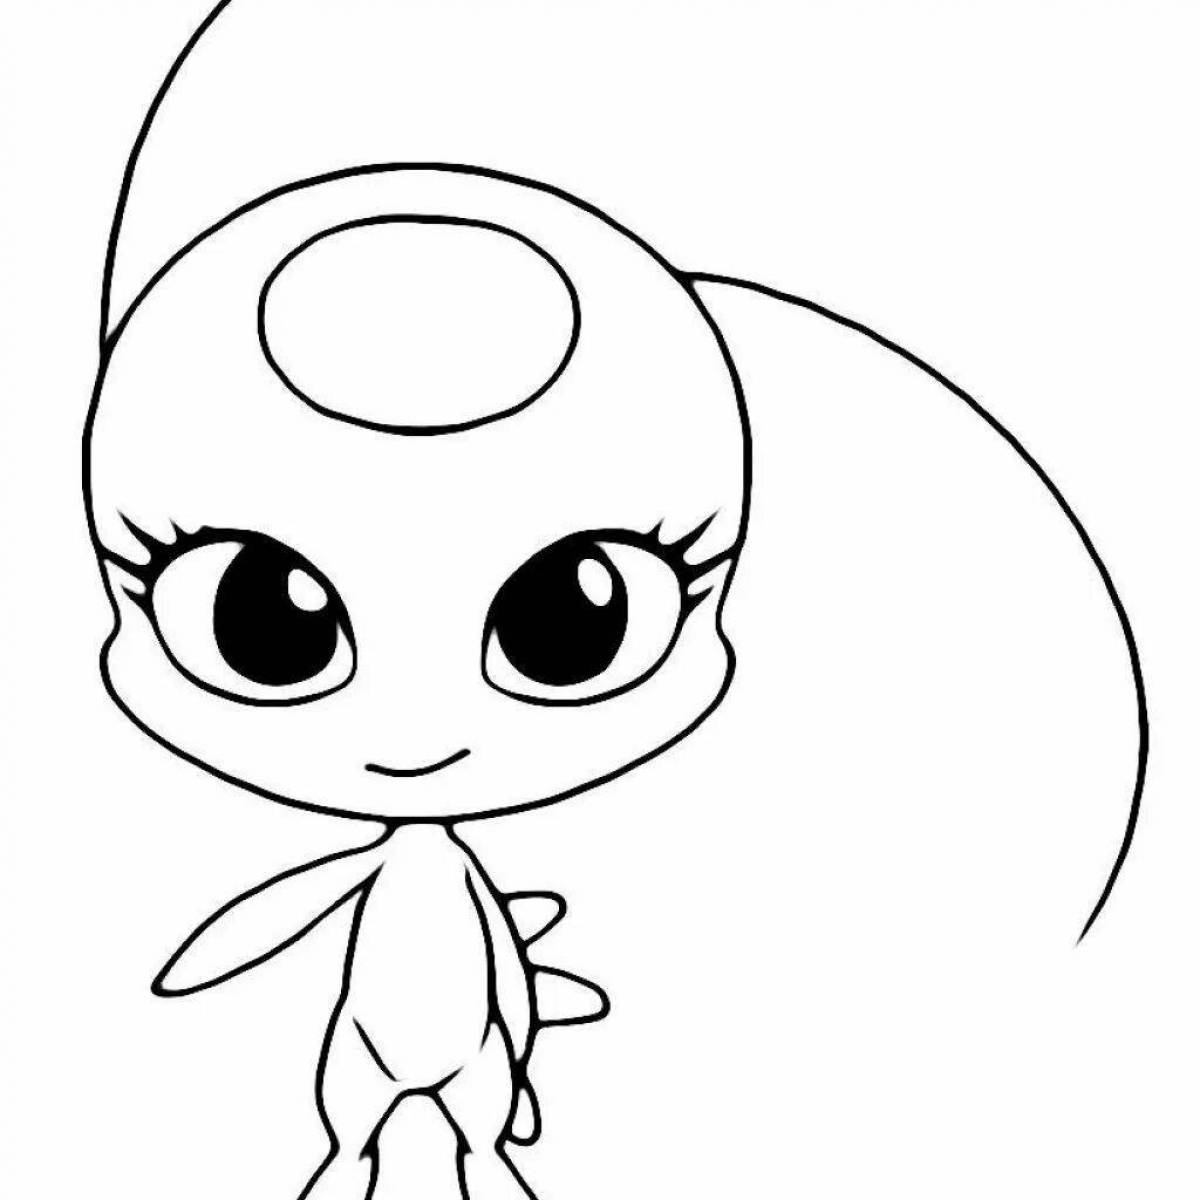 Coloring page of the mascot of the bright lady bug